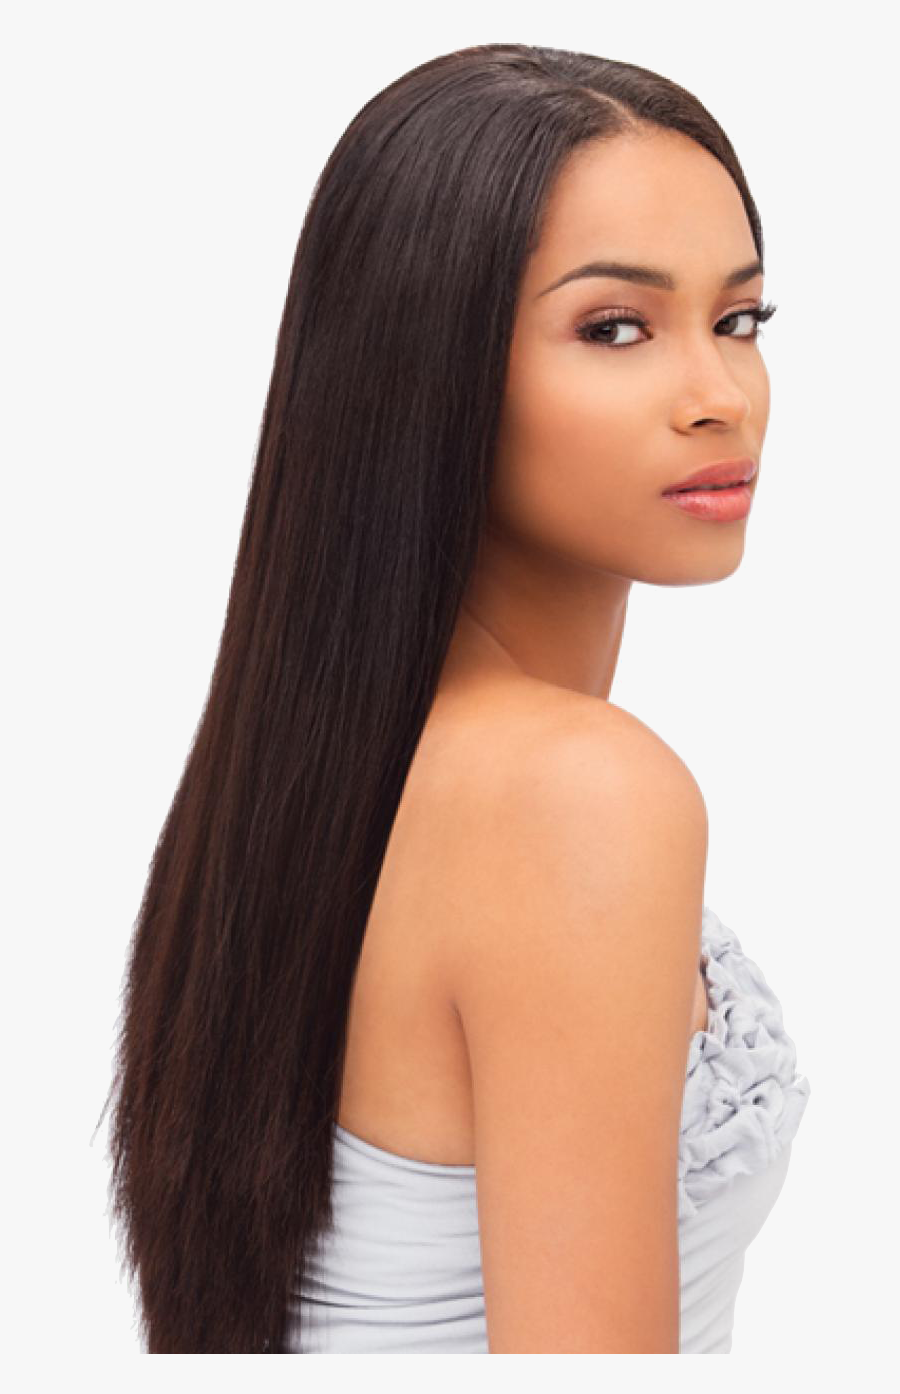 Straightening And Smoothing Hair - Mixed Girls With Straight Hair, Transparent Clipart